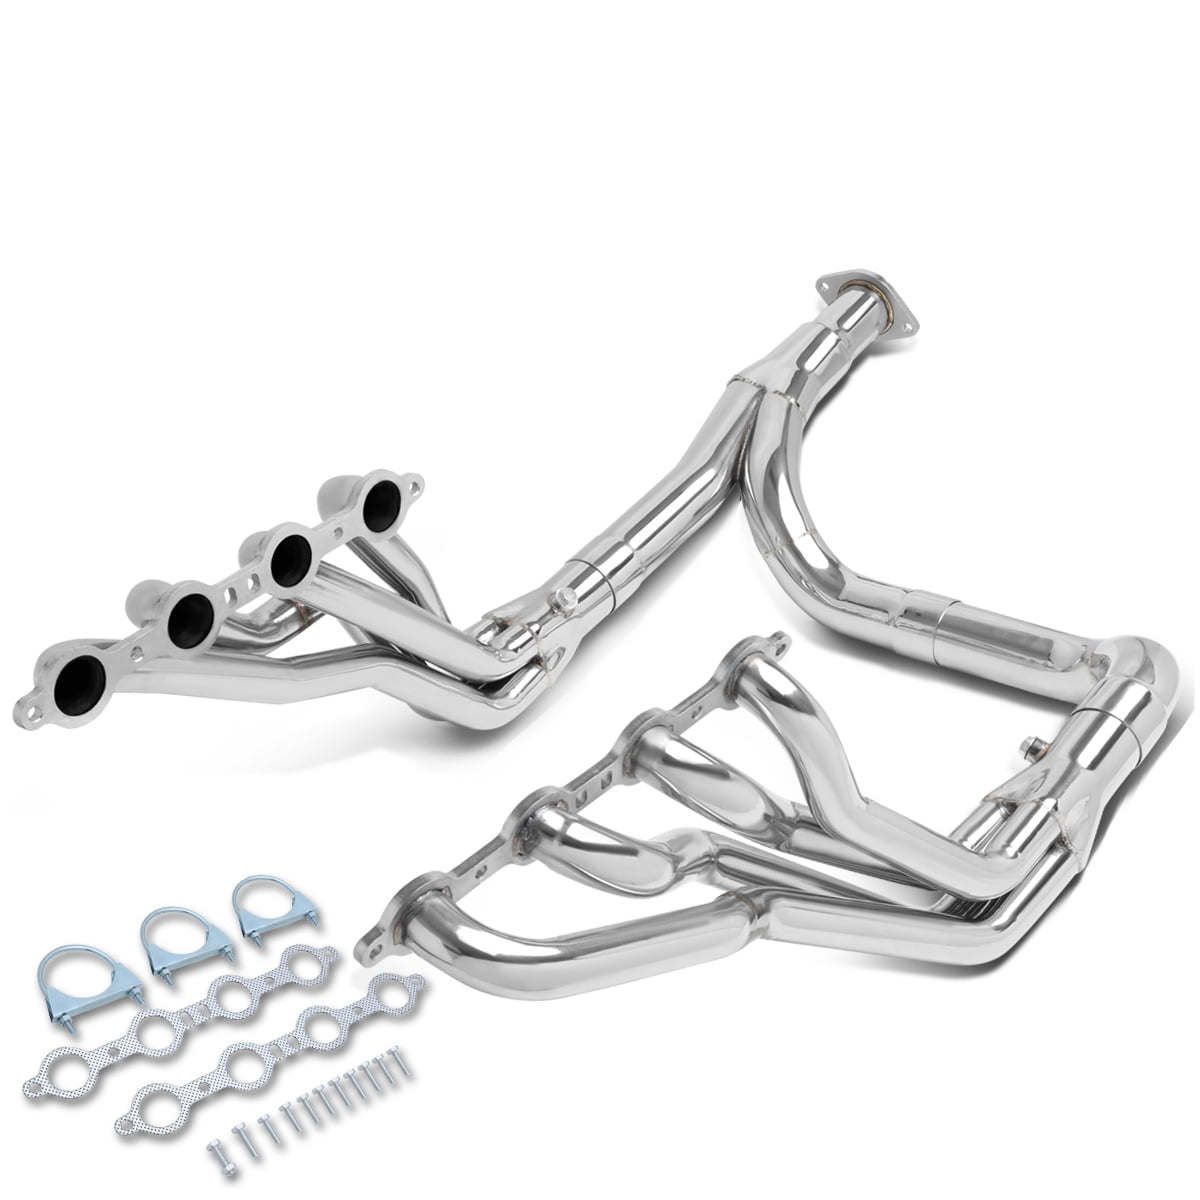 FOR 1999-2006 TAHOE/YUKON 4.8L 5.3L 6.0L ENGINE LONG TUBE EXHAUST HEADER+Y PIPE